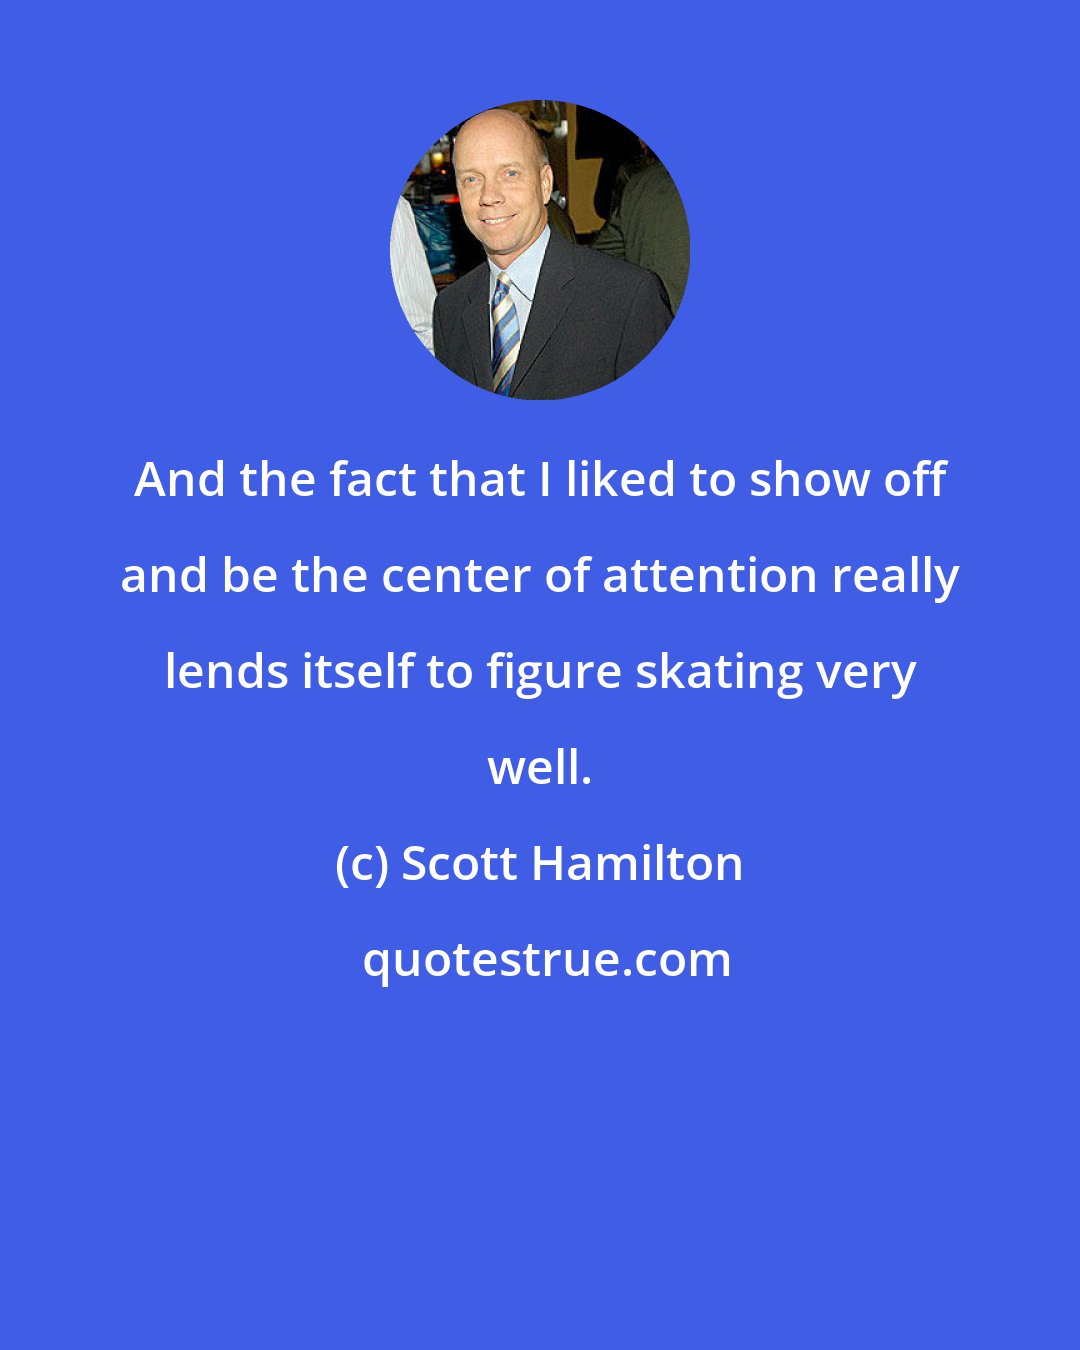 Scott Hamilton: And the fact that I liked to show off and be the center of attention really lends itself to figure skating very well.